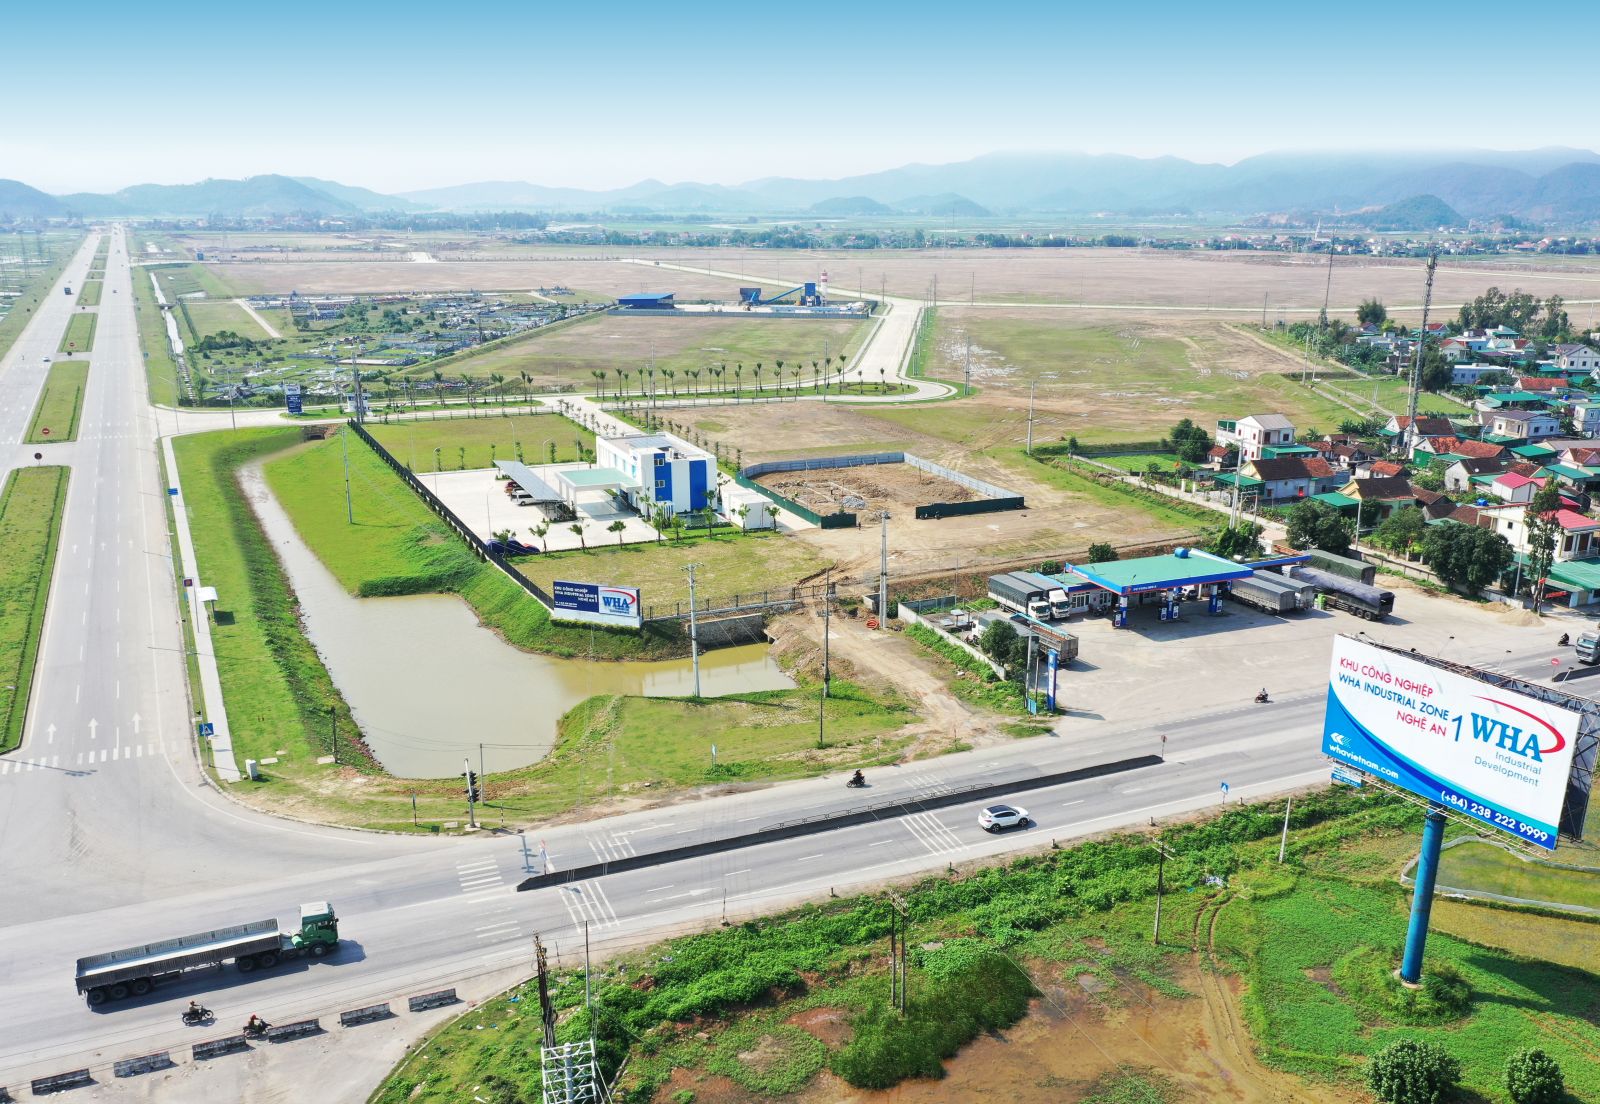 General operation situation of industrial parks in Vietnam in 2021